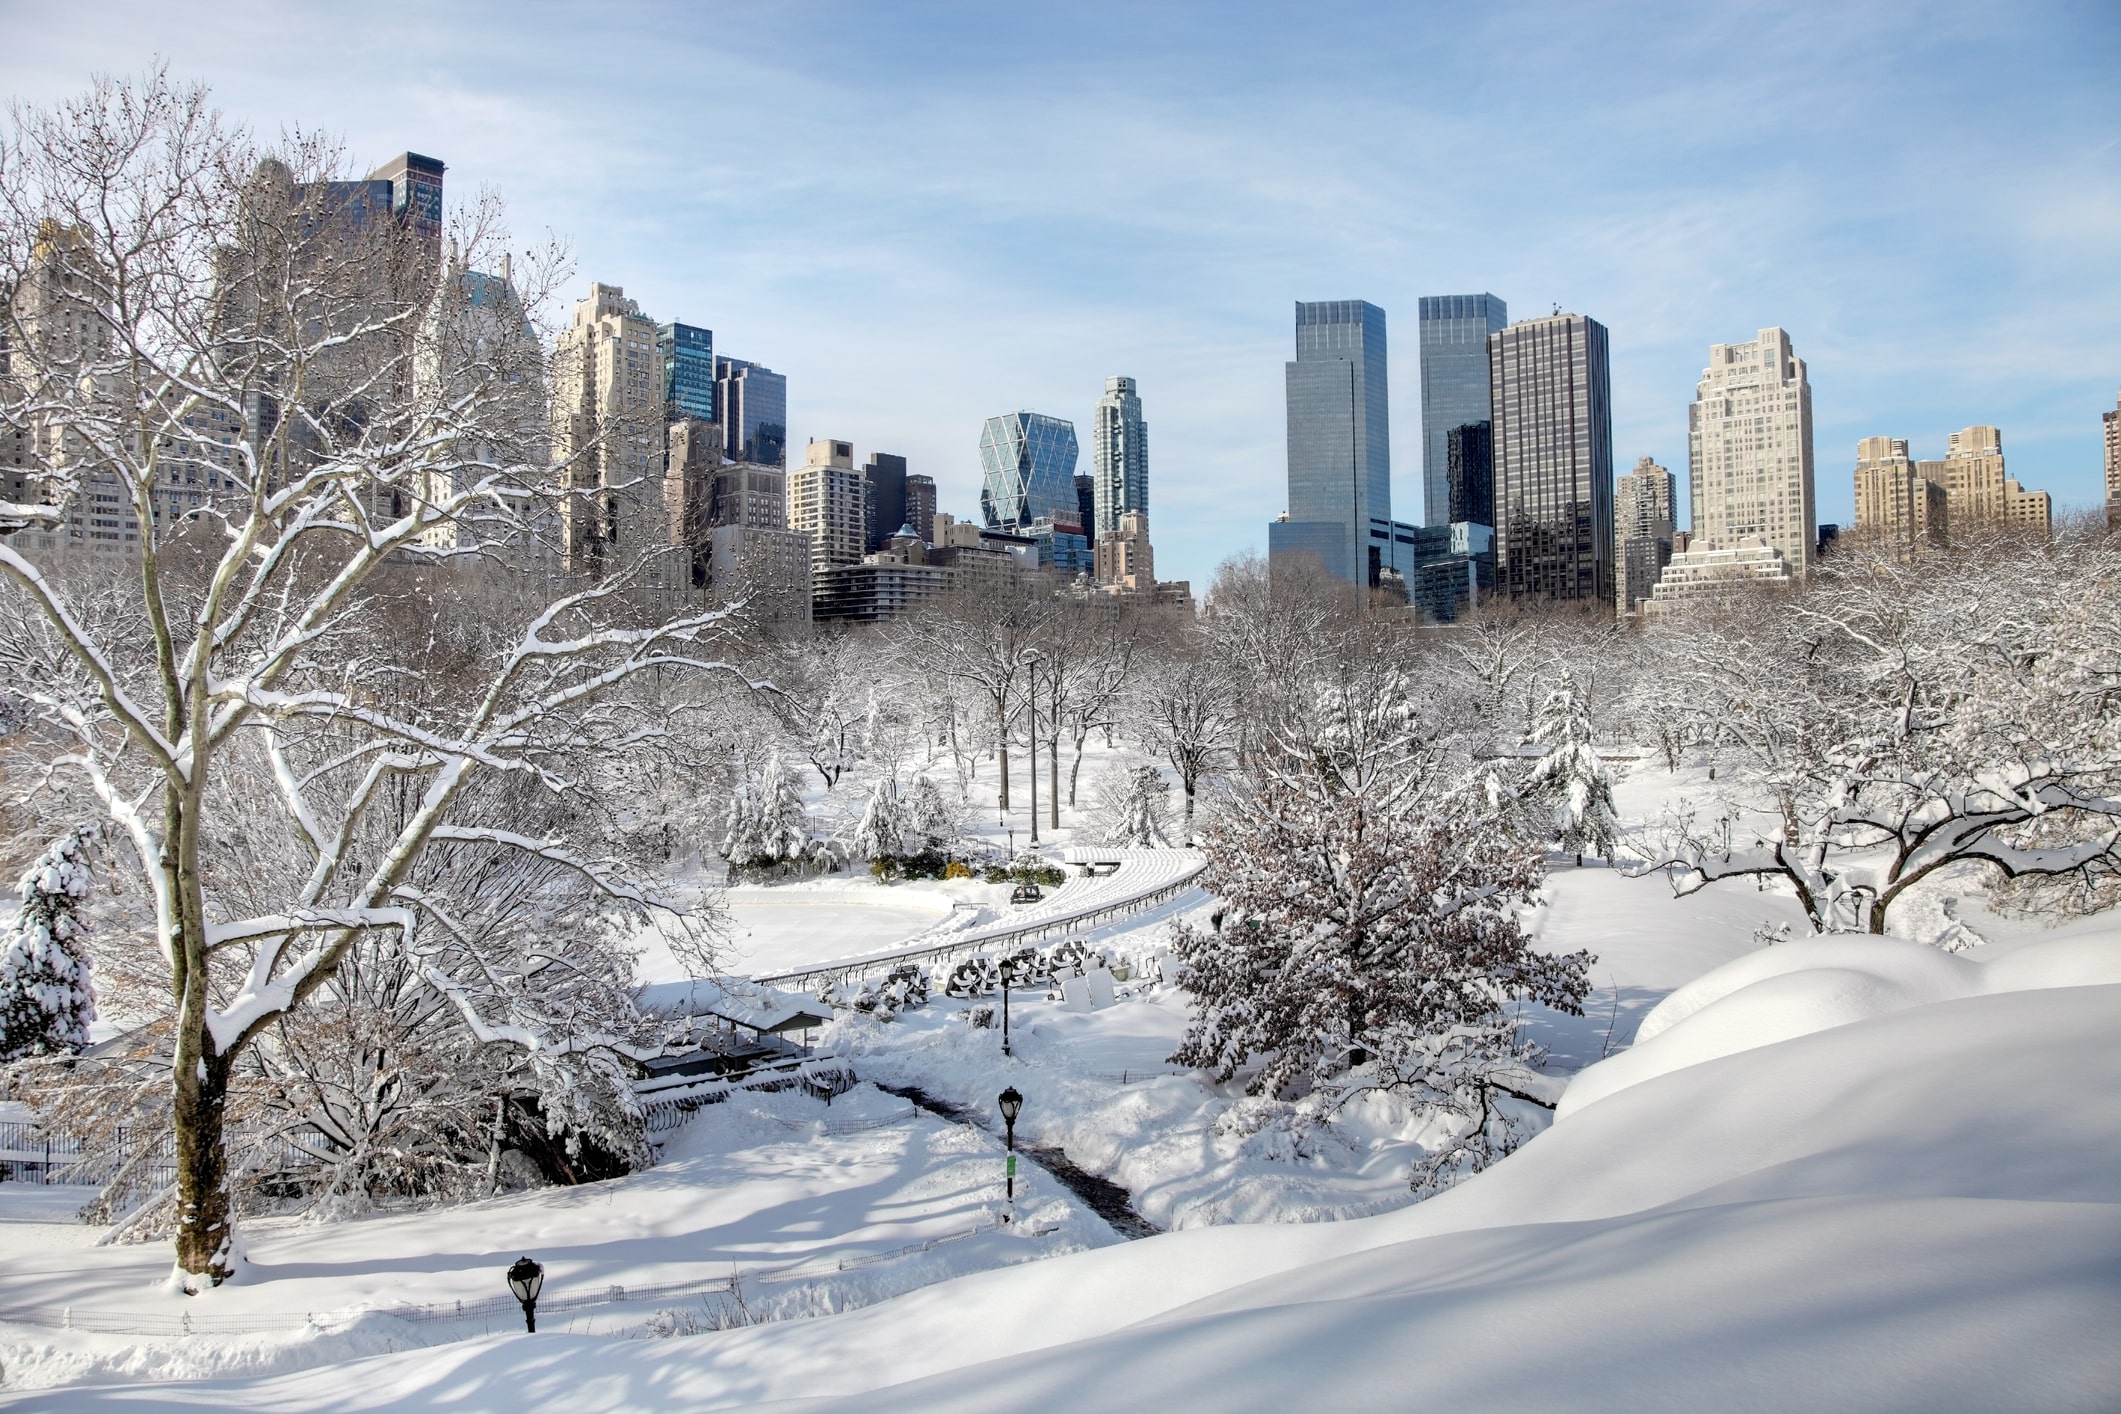 Snowy Central park with Manhattan skyline in the background in NYC, New York.